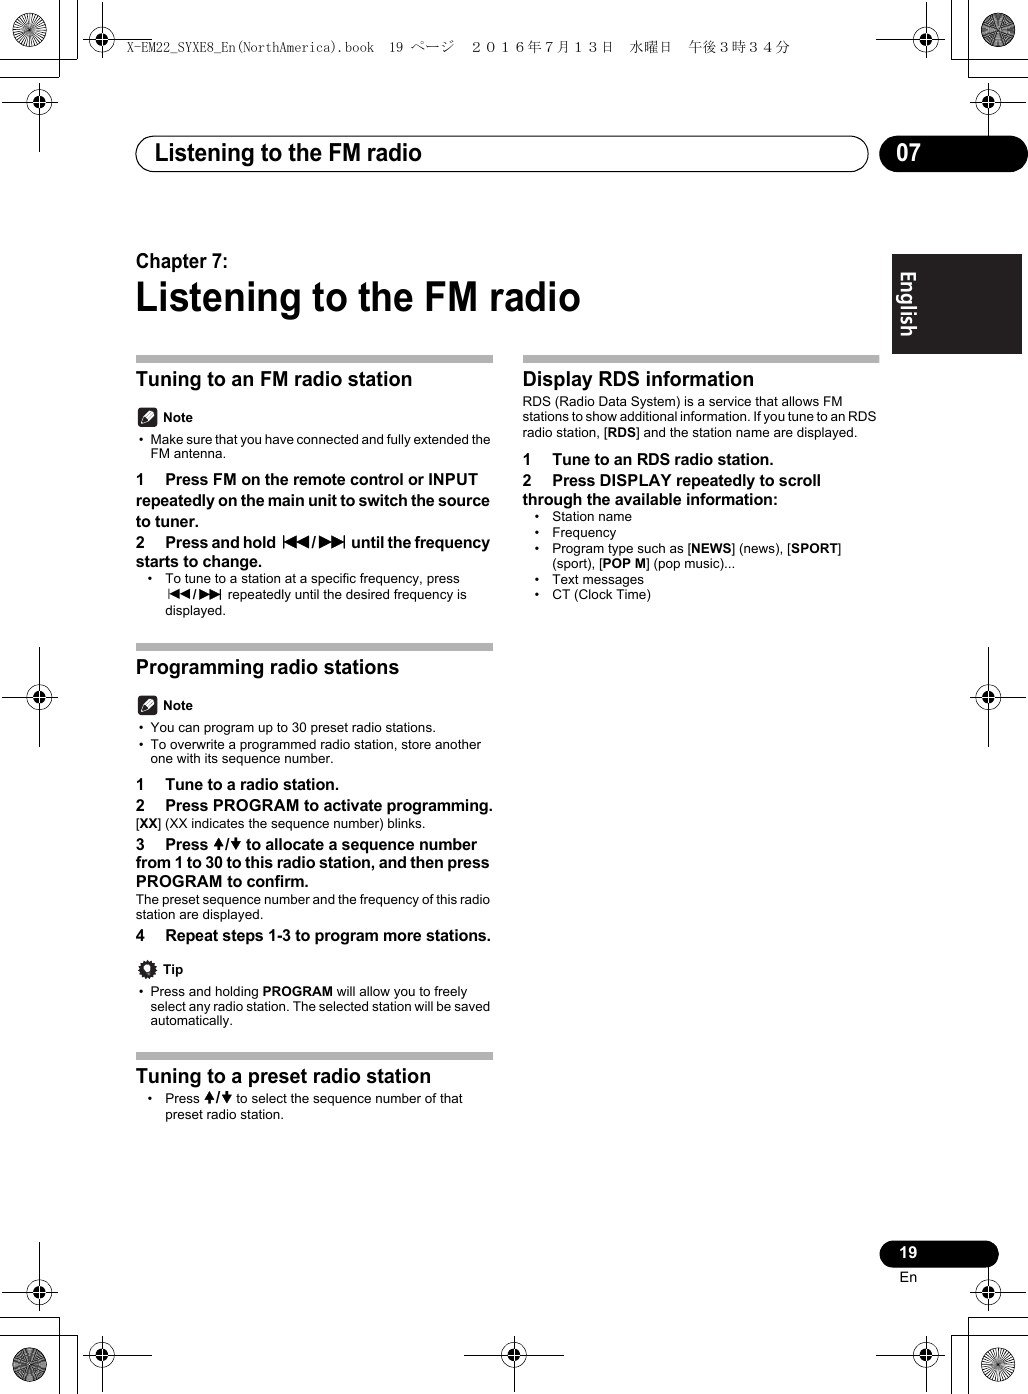 Listening to the FM radio 0719EnEnglish Français EspañolChapter 7:Listening to the FM radioTuning to an FM radio station Note• Make sure that you have connected and fully extended the FM antenna.1 Press FM on the remote control or INPUT repeatedly on the main unit to switch the source to tuner.2 Press and hold :/9 until the frequency starts to change.• To tune to a station at a specific frequency, press :/9 repeatedly until the desired frequency is displayed.Programming radio stations Note• You can program up to 30 preset radio stations.• To overwrite a programmed radio station, store another one with its sequence number.1 Tune to a radio station.2 Press PROGRAM to activate programming.[XX] (XX indicates the sequence number) blinks.3 Press / to allocate a sequence number from 1 to 30 to this radio station, and then press PROGRAM to confirm.The preset sequence number and the frequency of this radio station are displayed.4 Repeat steps 1-3 to program more stations. Tip• Press and holding PROGRAM will allow you to freely select any radio station. The selected station will be saved automatically.Tuning to a preset radio station• Press / to select the sequence number of that preset radio station.Display RDS information RDS (Radio Data System) is a service that allows FM stations to show additional information. If you tune to an RDS radio station, [RDS] and the station name are displayed.1 Tune to an RDS radio station.2 Press DISPLAY repeatedly to scroll through the available information:• Station name• Frequency• Program type such as [NEWS] (news), [SPORT] (sport), [POP M] (pop music)...• Text messages• CT (Clock Time)X-EM22_SYXE8_En(NorthAmerica).book  19 ページ  ２０１６年７月１３日　水曜日　午後３時３４分